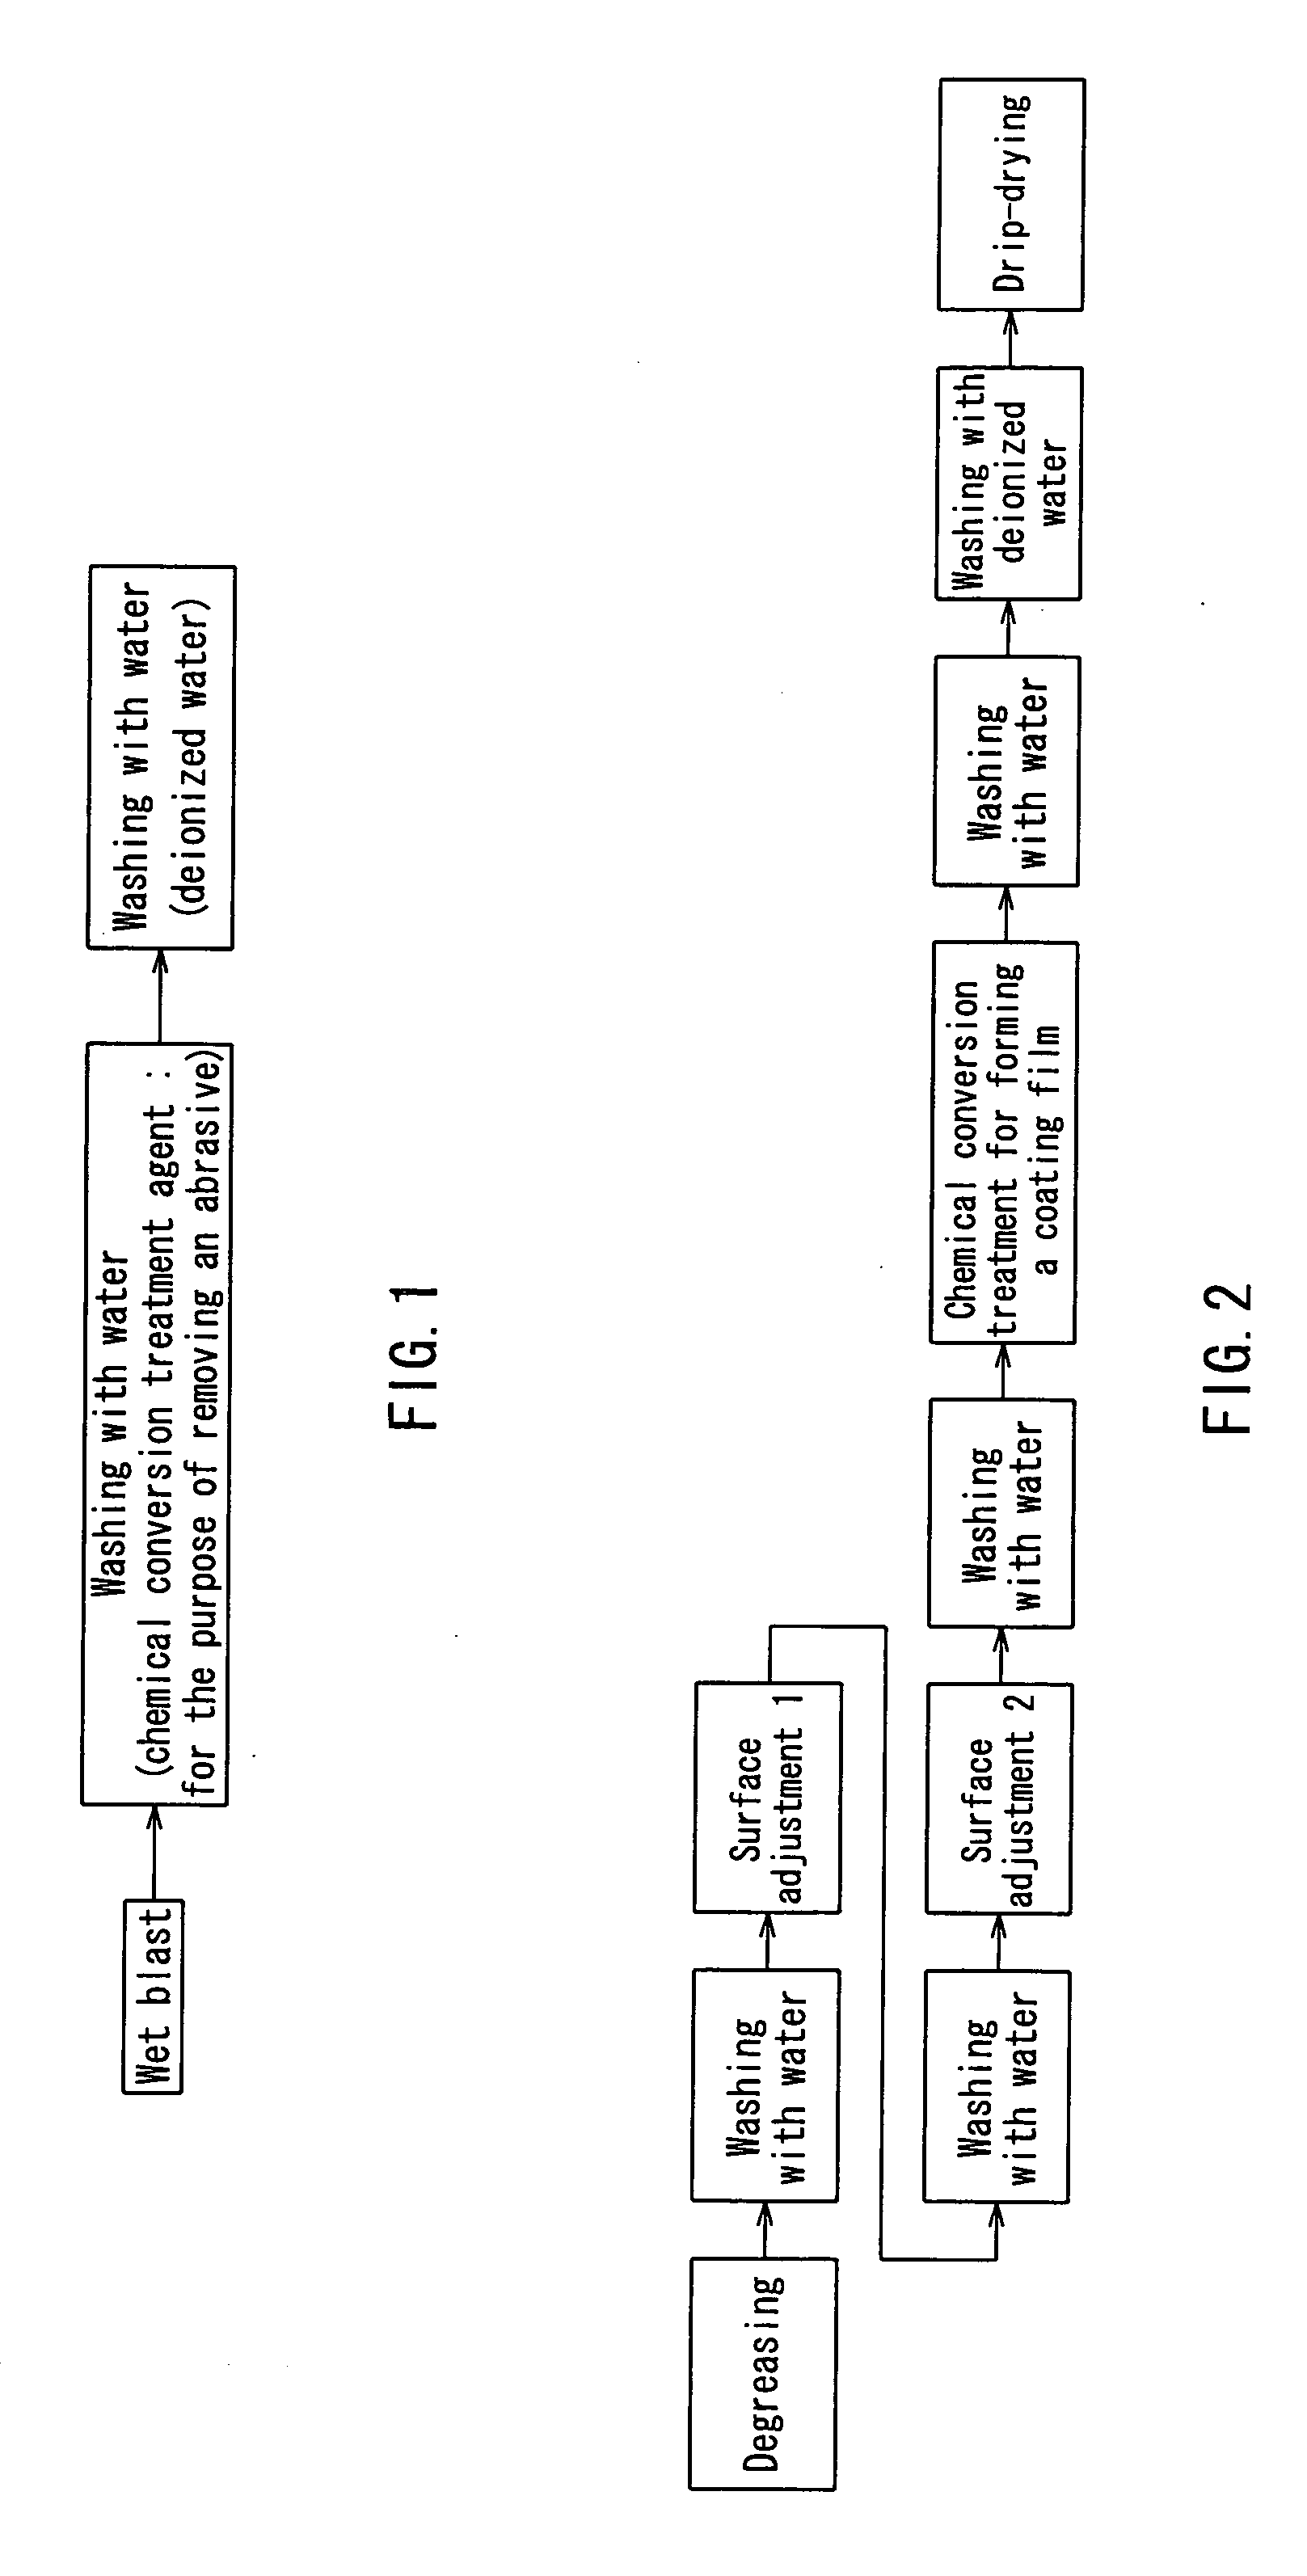 Mg or Mg-alloy housing and method for producing the same